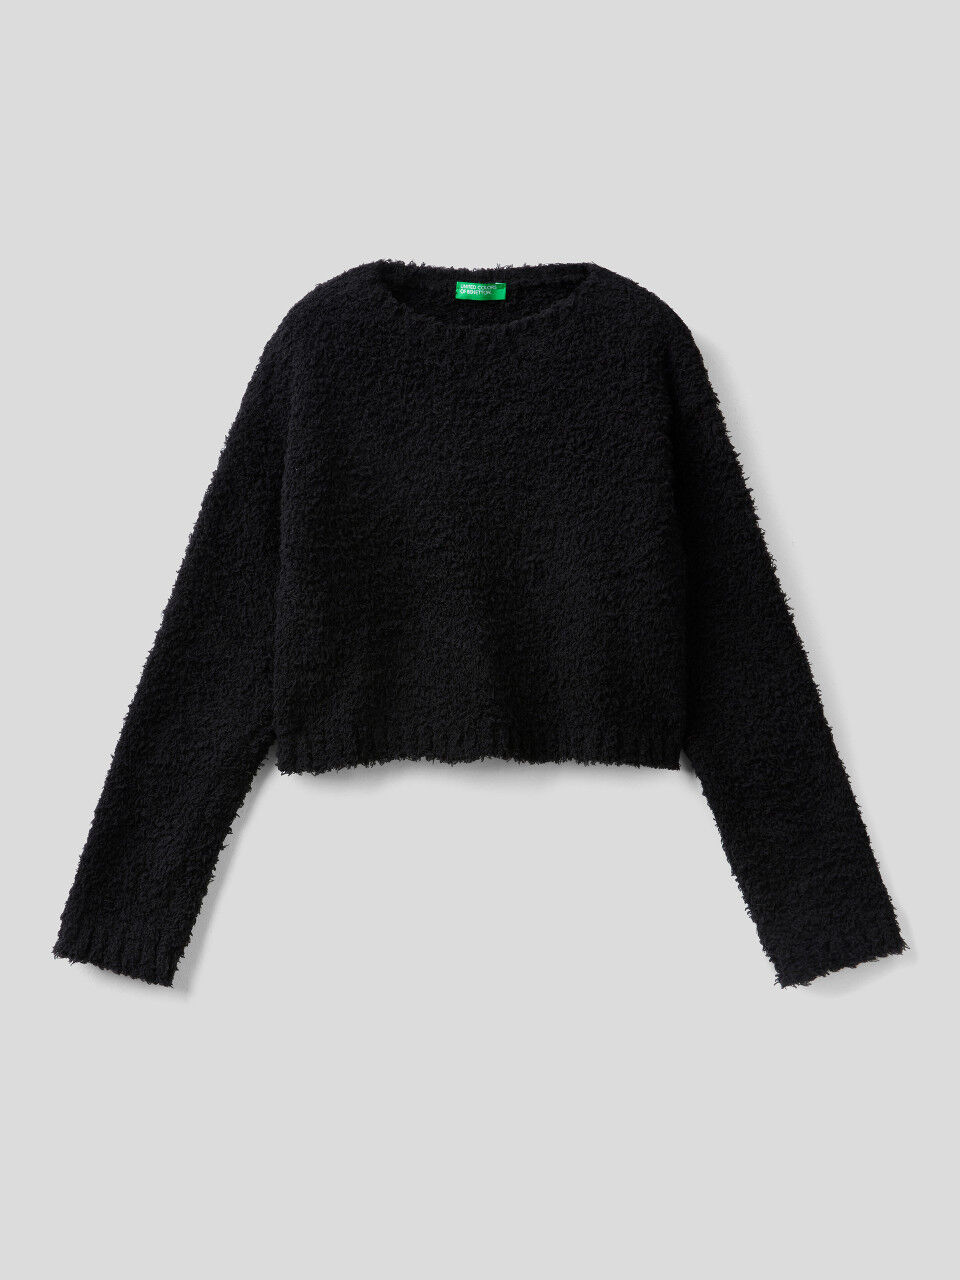 Cropped black sweater with bouclé look